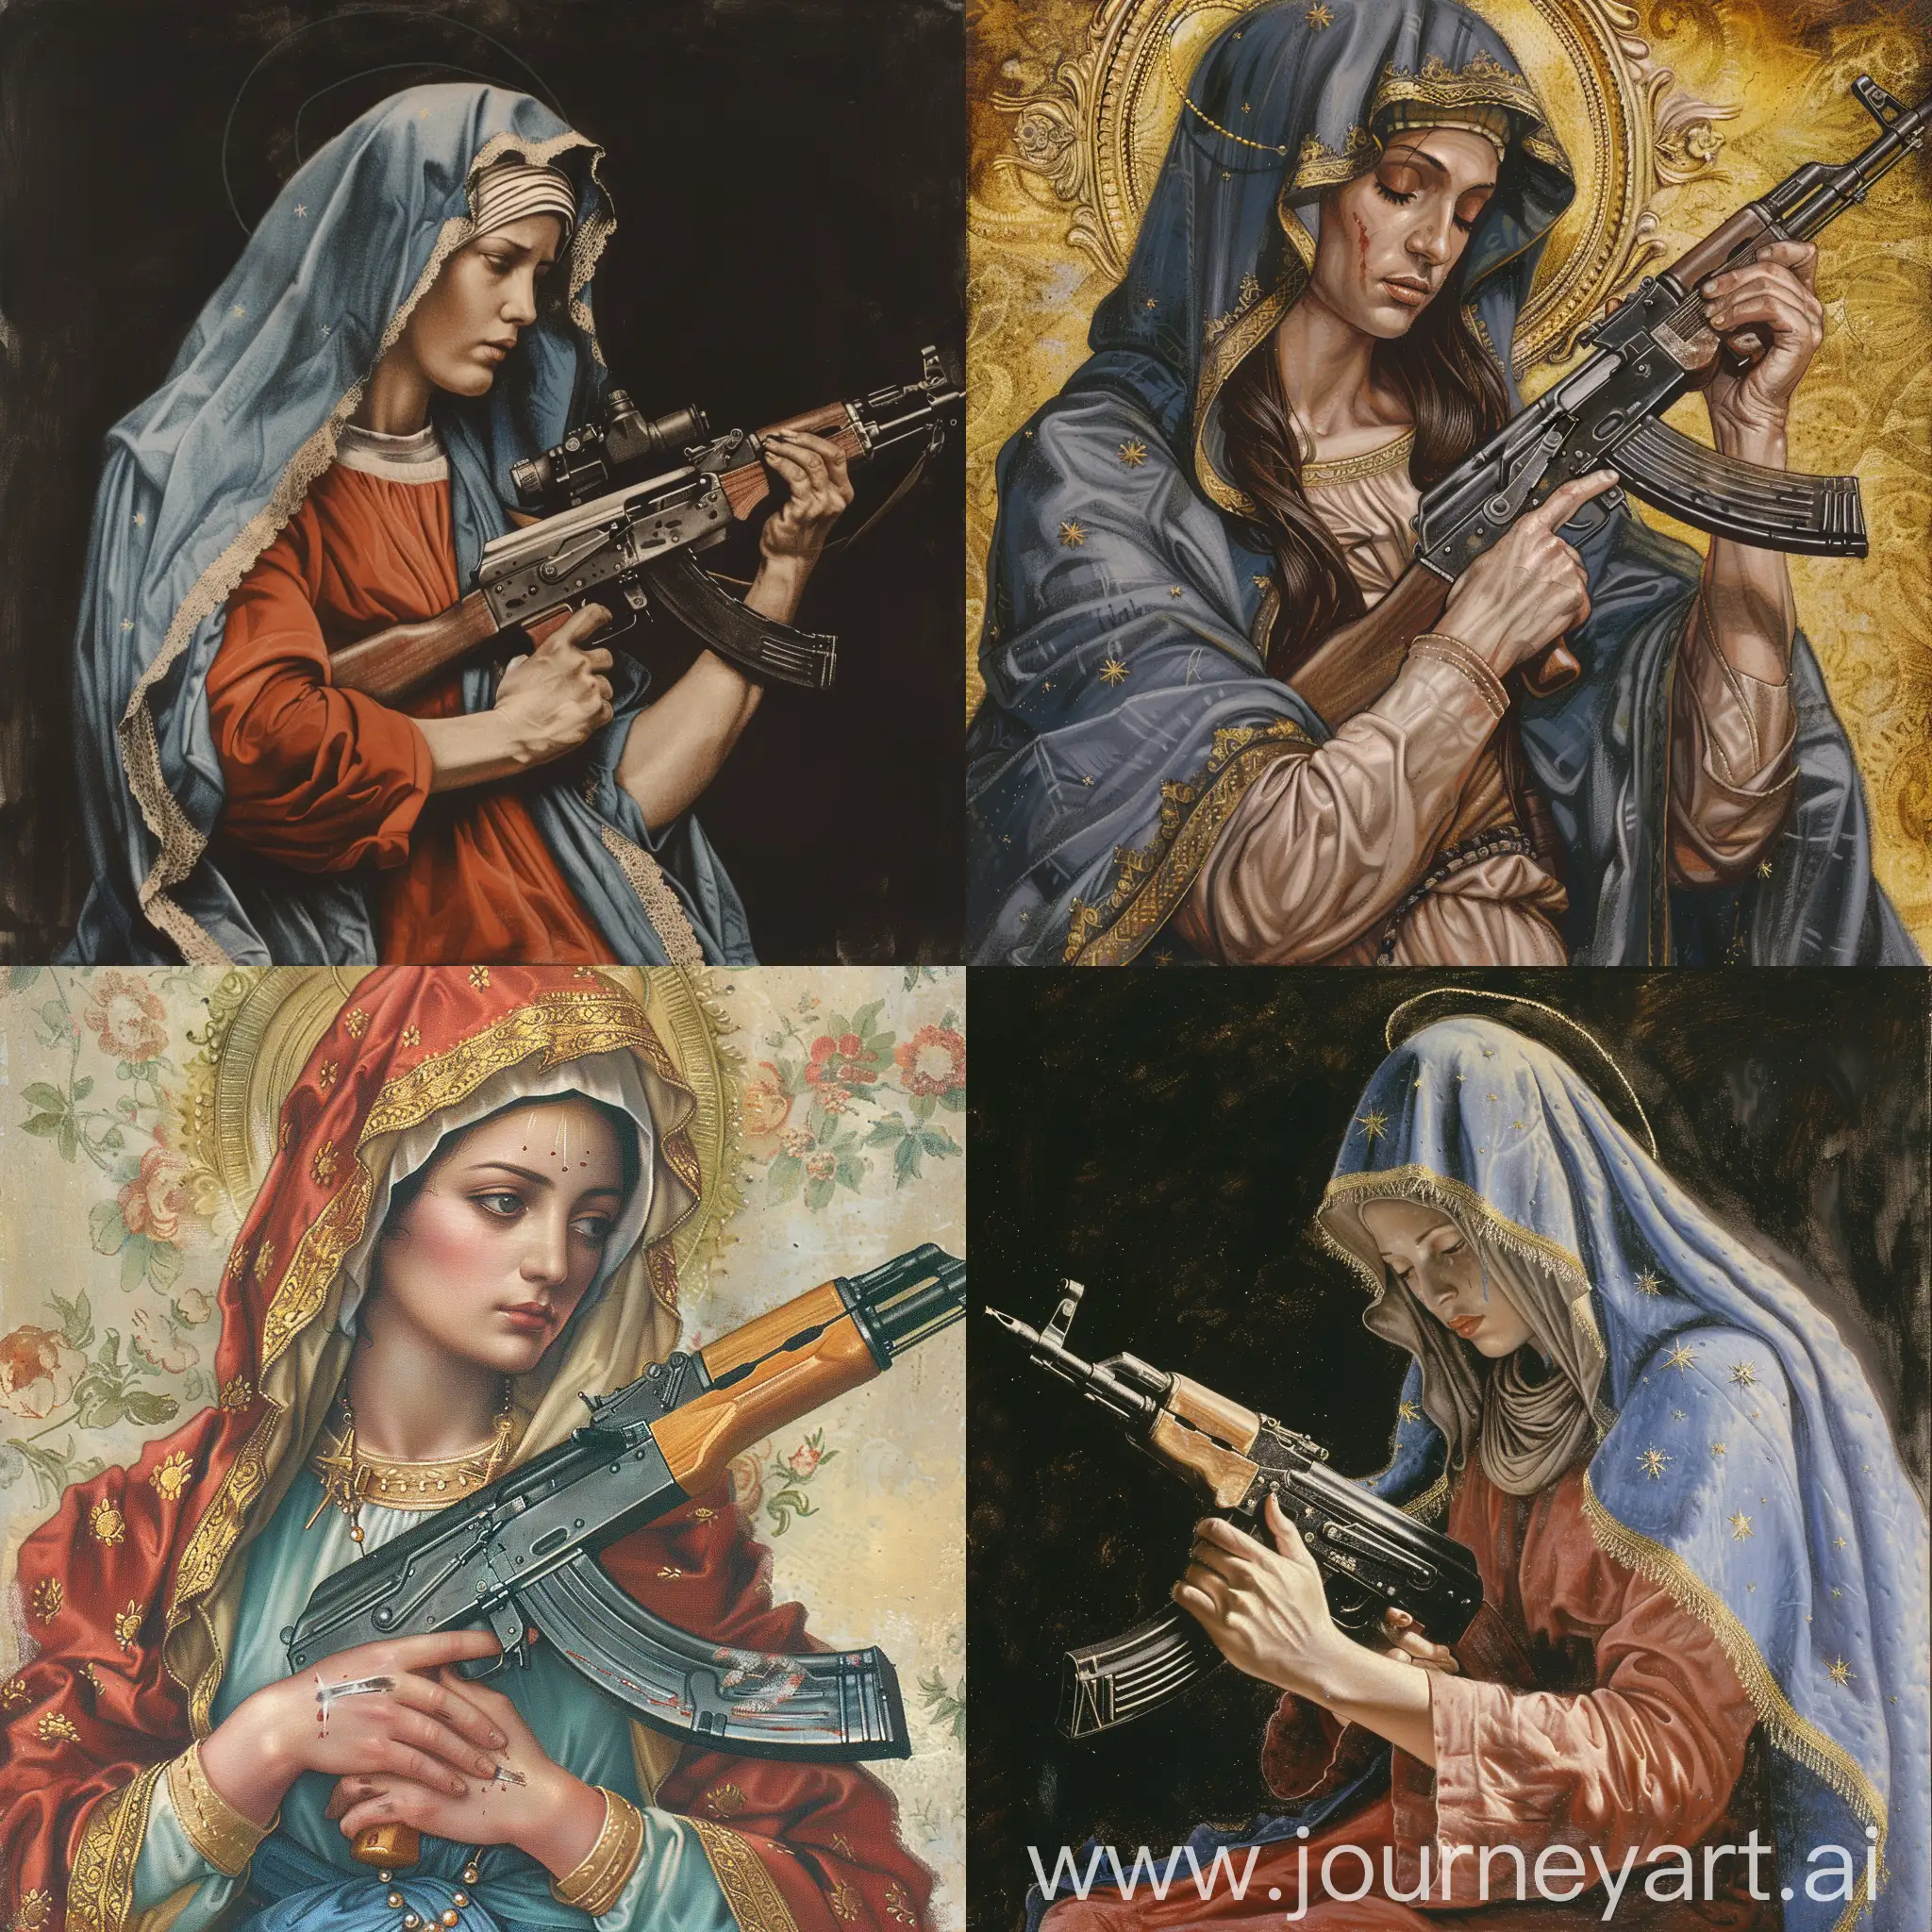 Virgin-Mary-Holding-AK47-Symbolic-Religious-Figure-with-Weapon